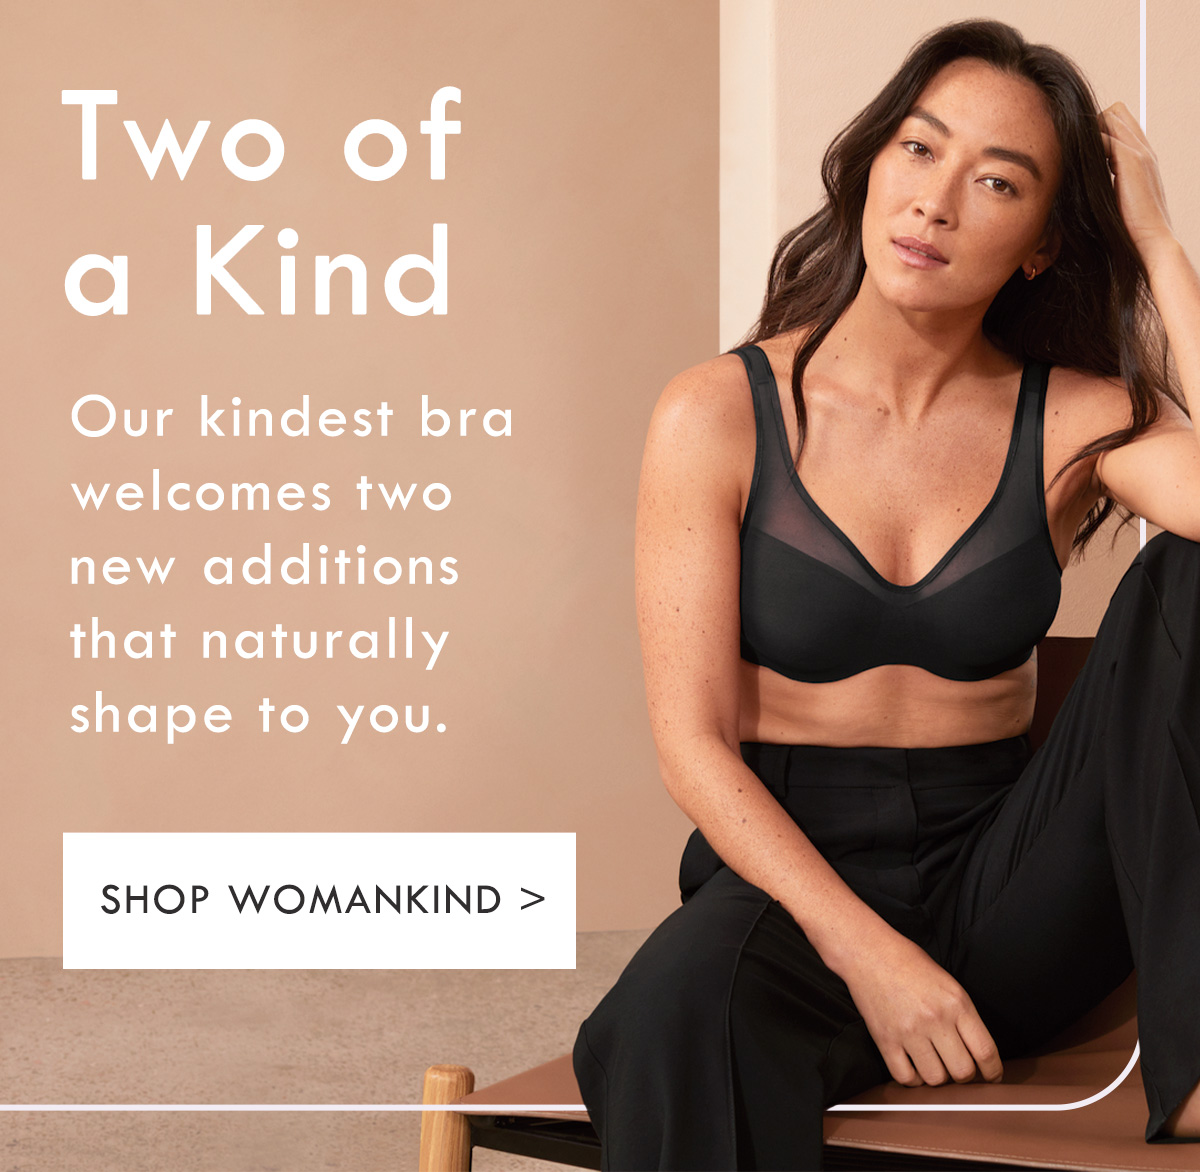 Berlei - Two of a Kind. Our kindest bra welcomes two new additions that naturally shape to you. Shop Womankind.